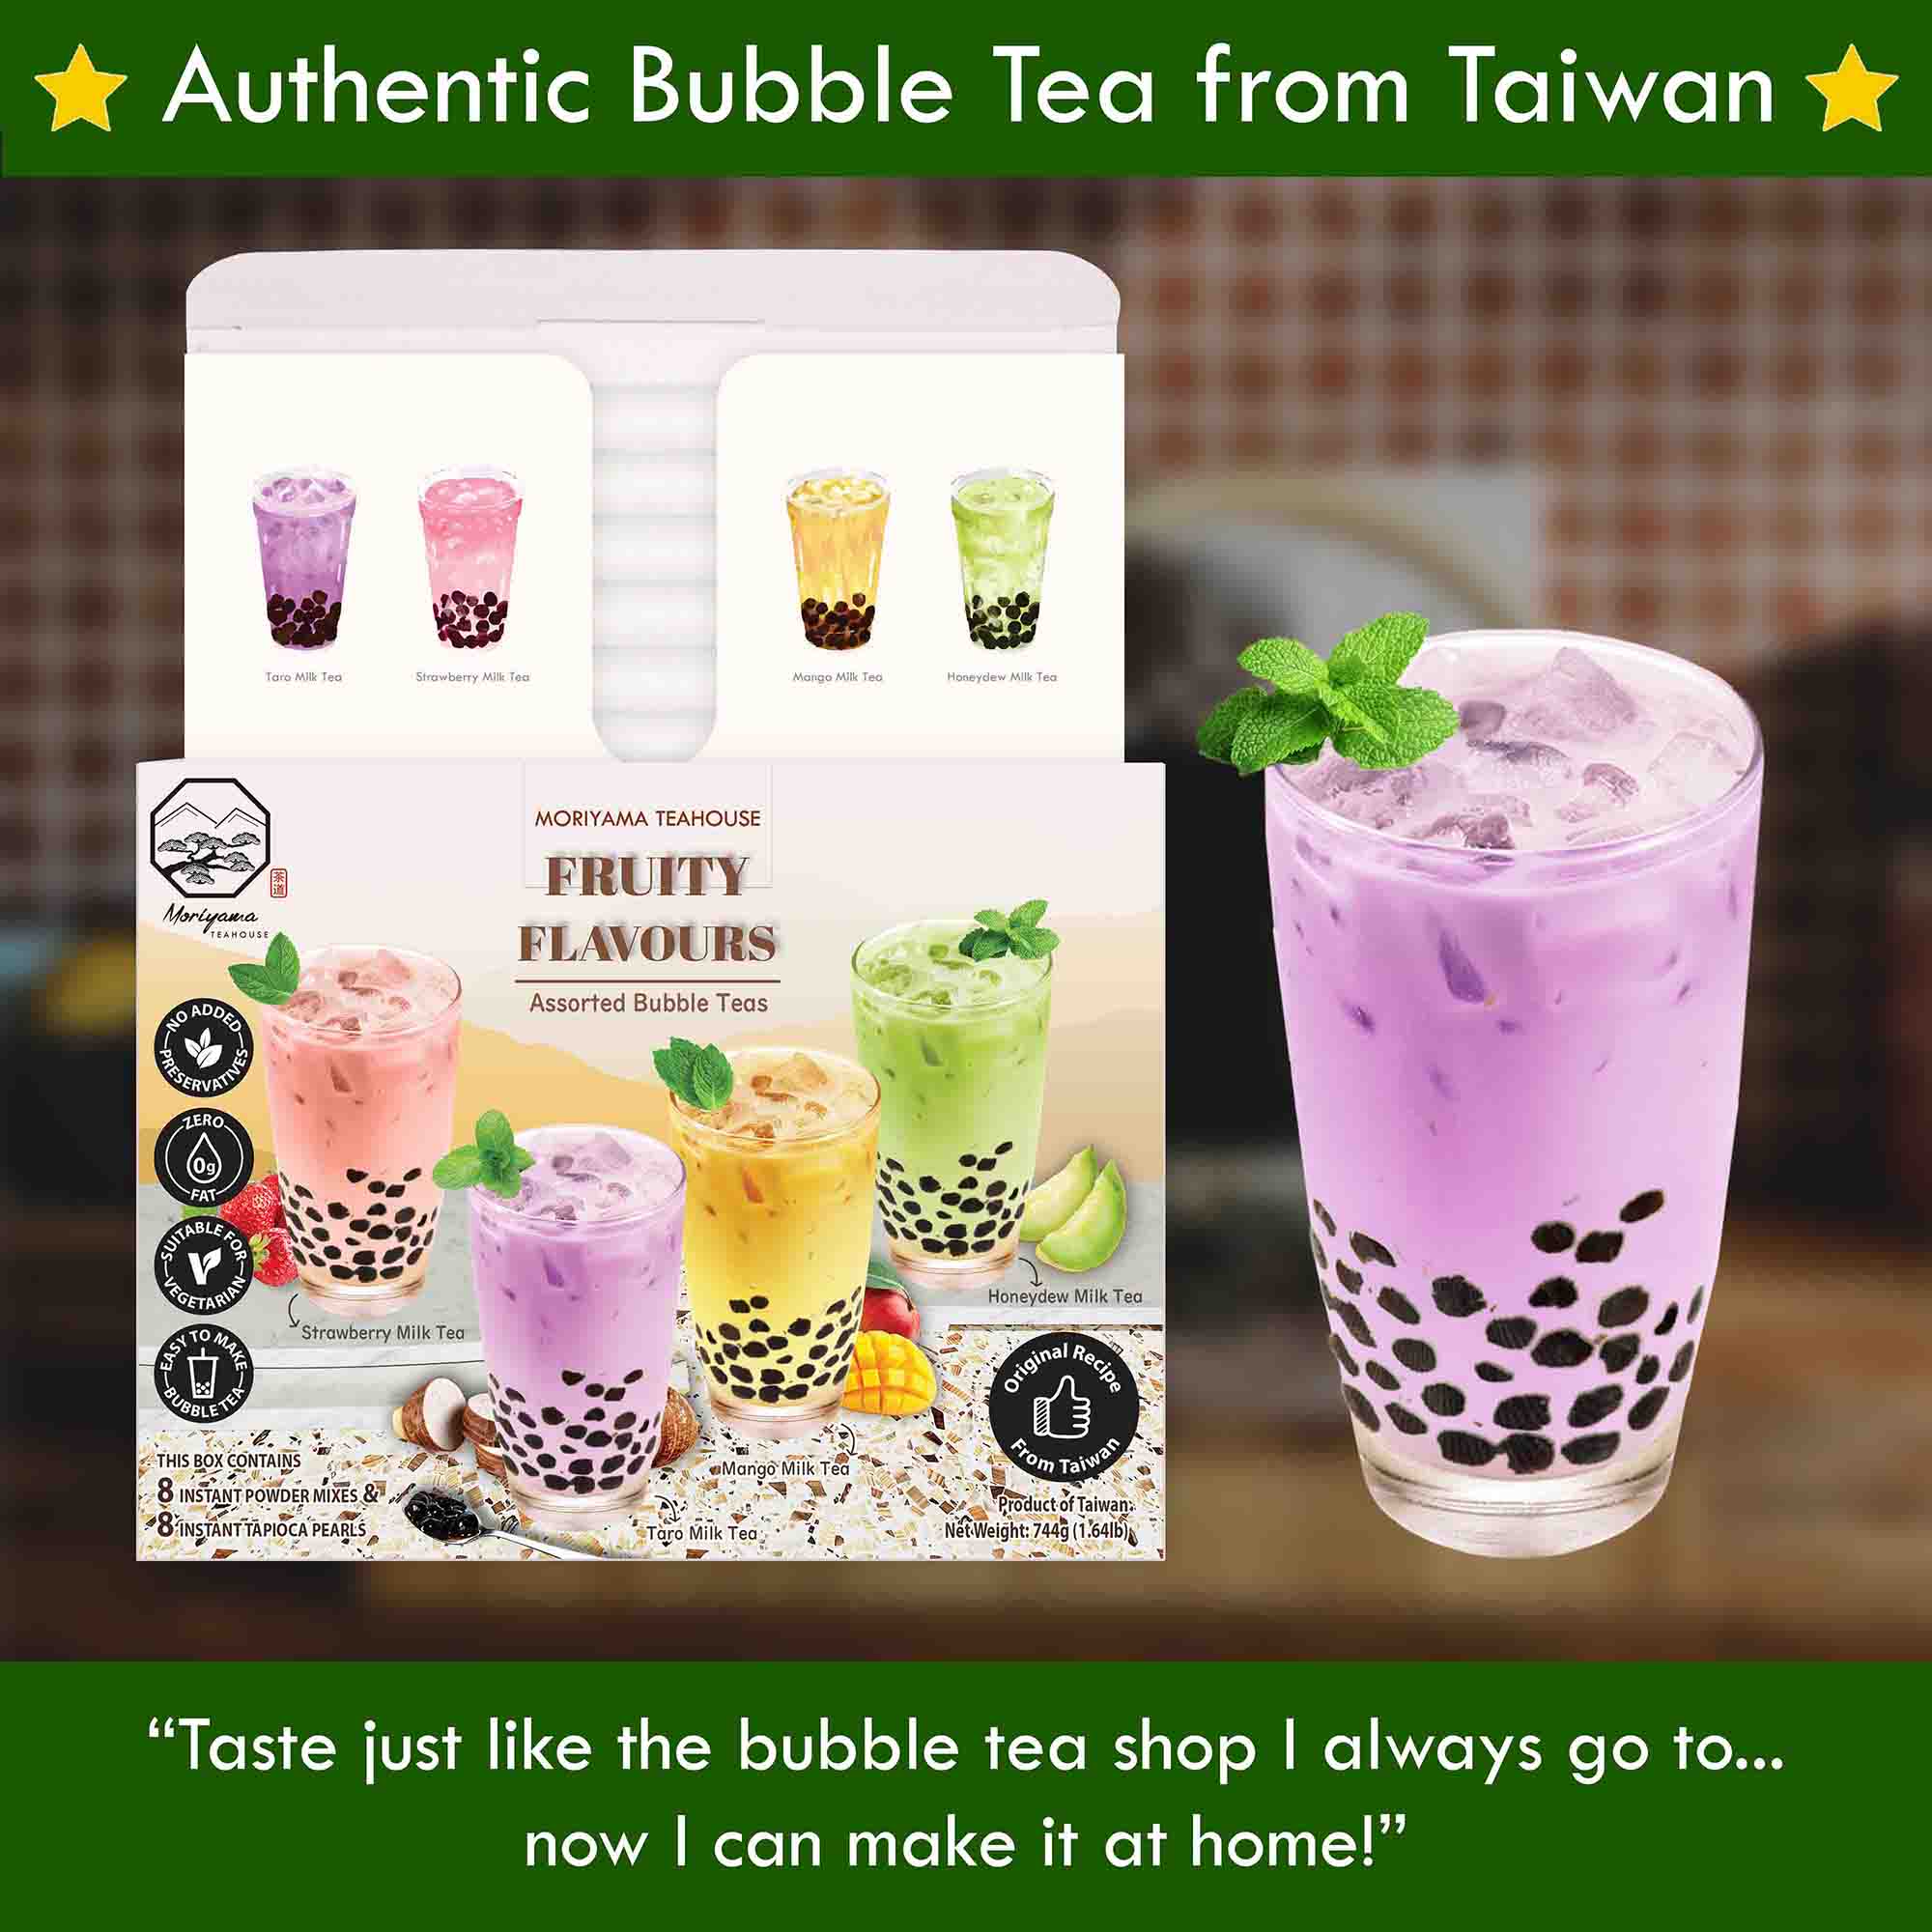 bubble tea is of authentic Taiwan recipe